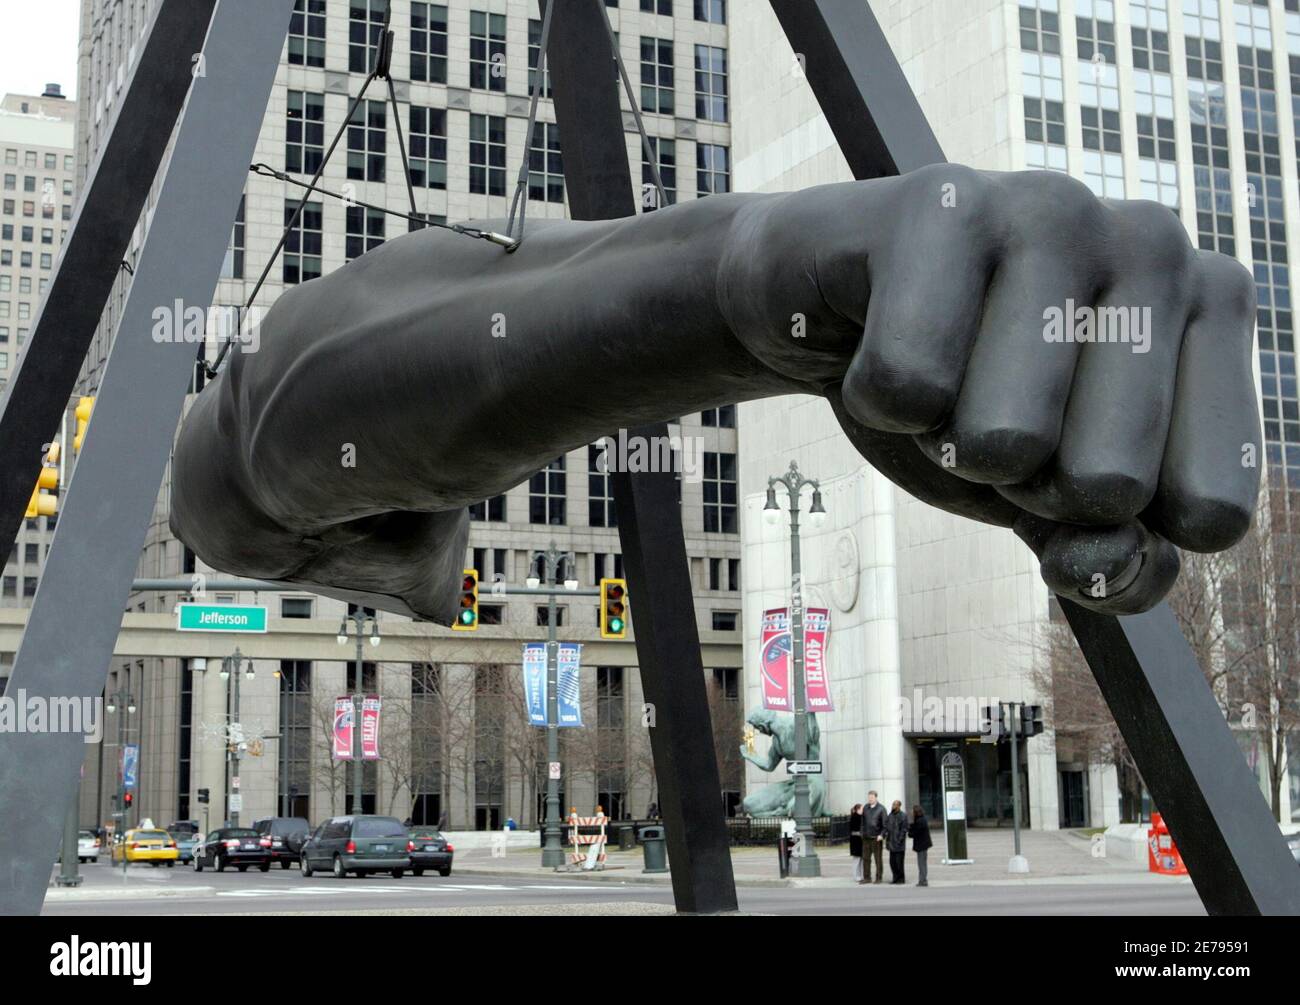 The Joe Louis 'Fist' sculpture hangs from a pyramid shaped support in downtown Detroit, Michigan January 27, 2006.  The bronze extended arm and fist is the city's tribute to the late boxing hero 'The Brown Bomber' Joe Louis. The fist is one of the first things visitors will see as they exit from one of the main expressways leading into the heart of downtown Detroit when it hosts [Super Bowl XL on Feb. 5 at Ford Field.] Stock Photo